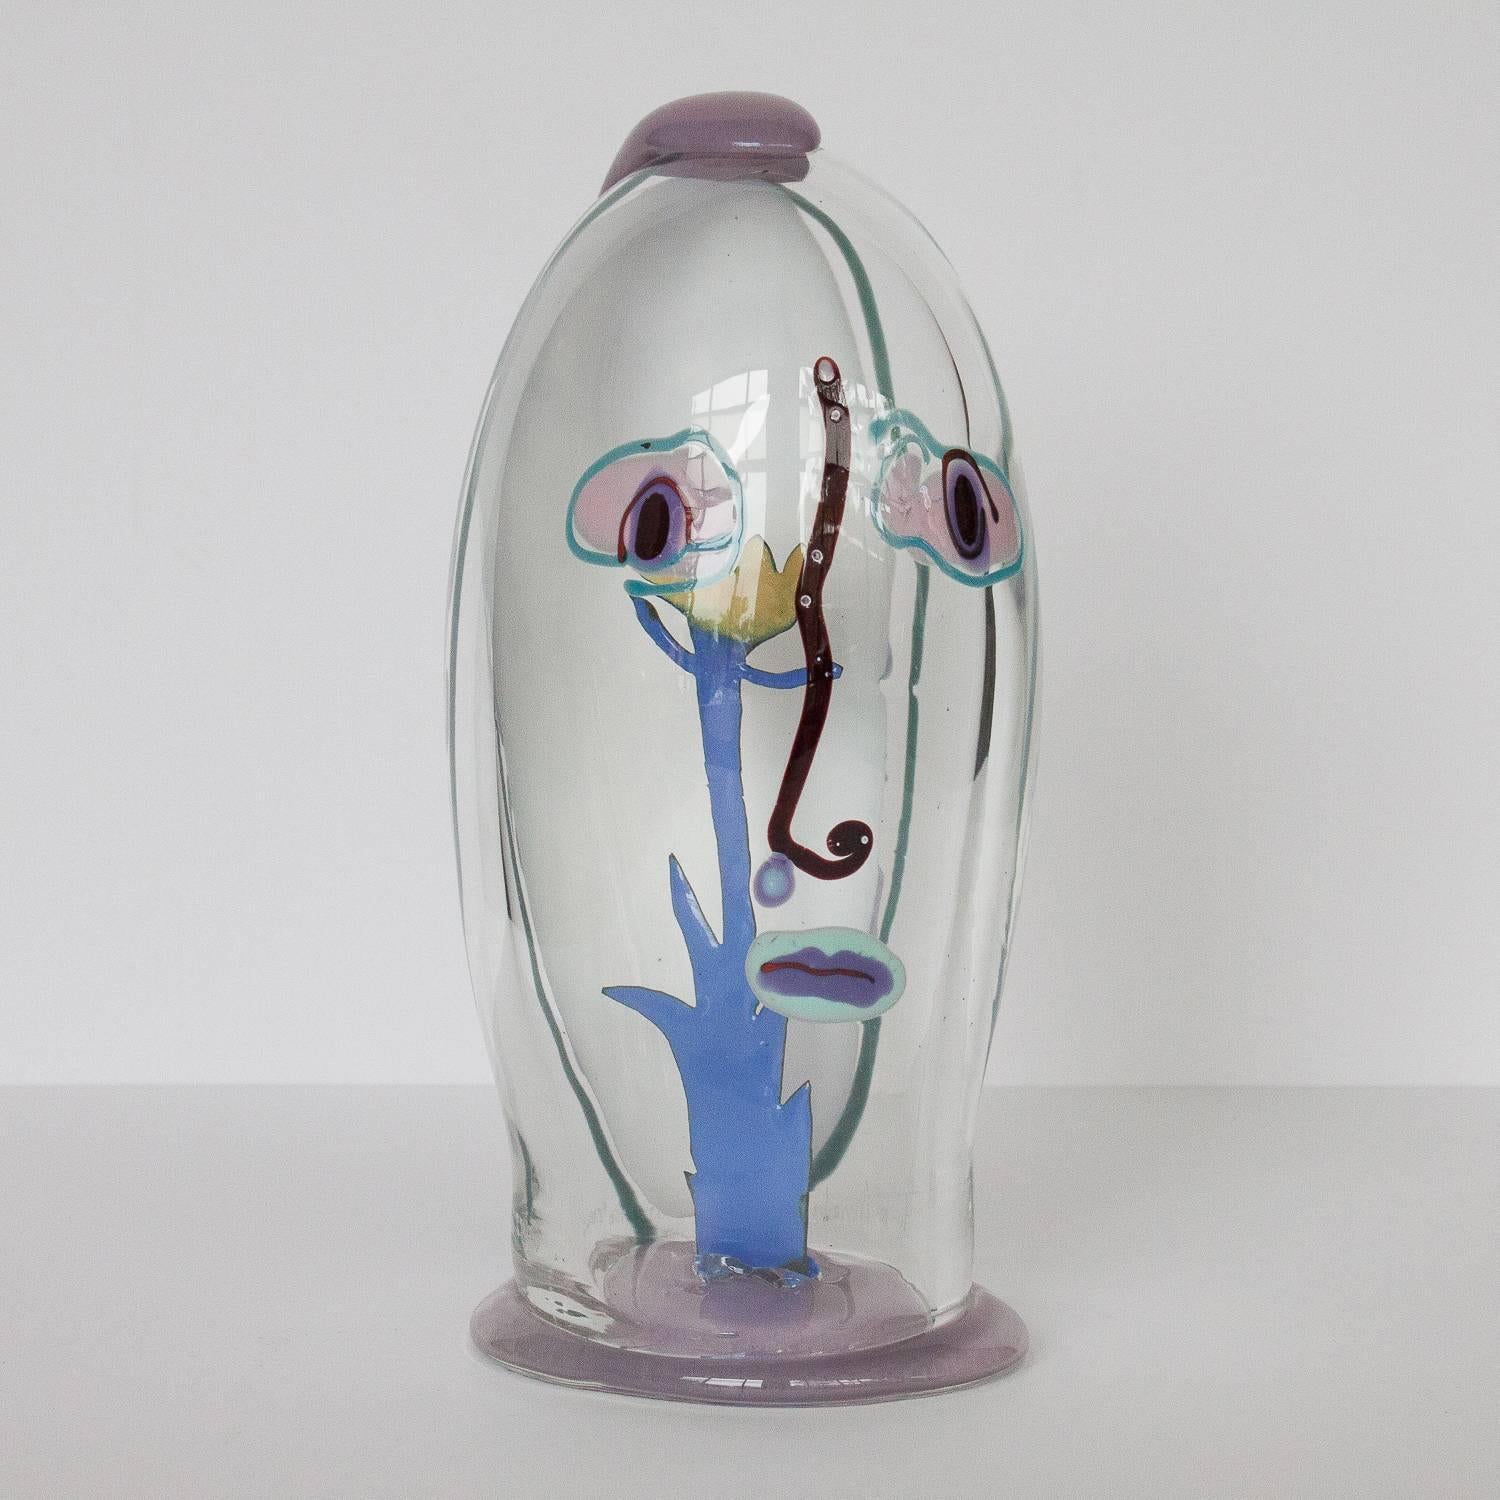 Glass canister figure by Hank Murta Adams (b. 1956).  Signed and titled 